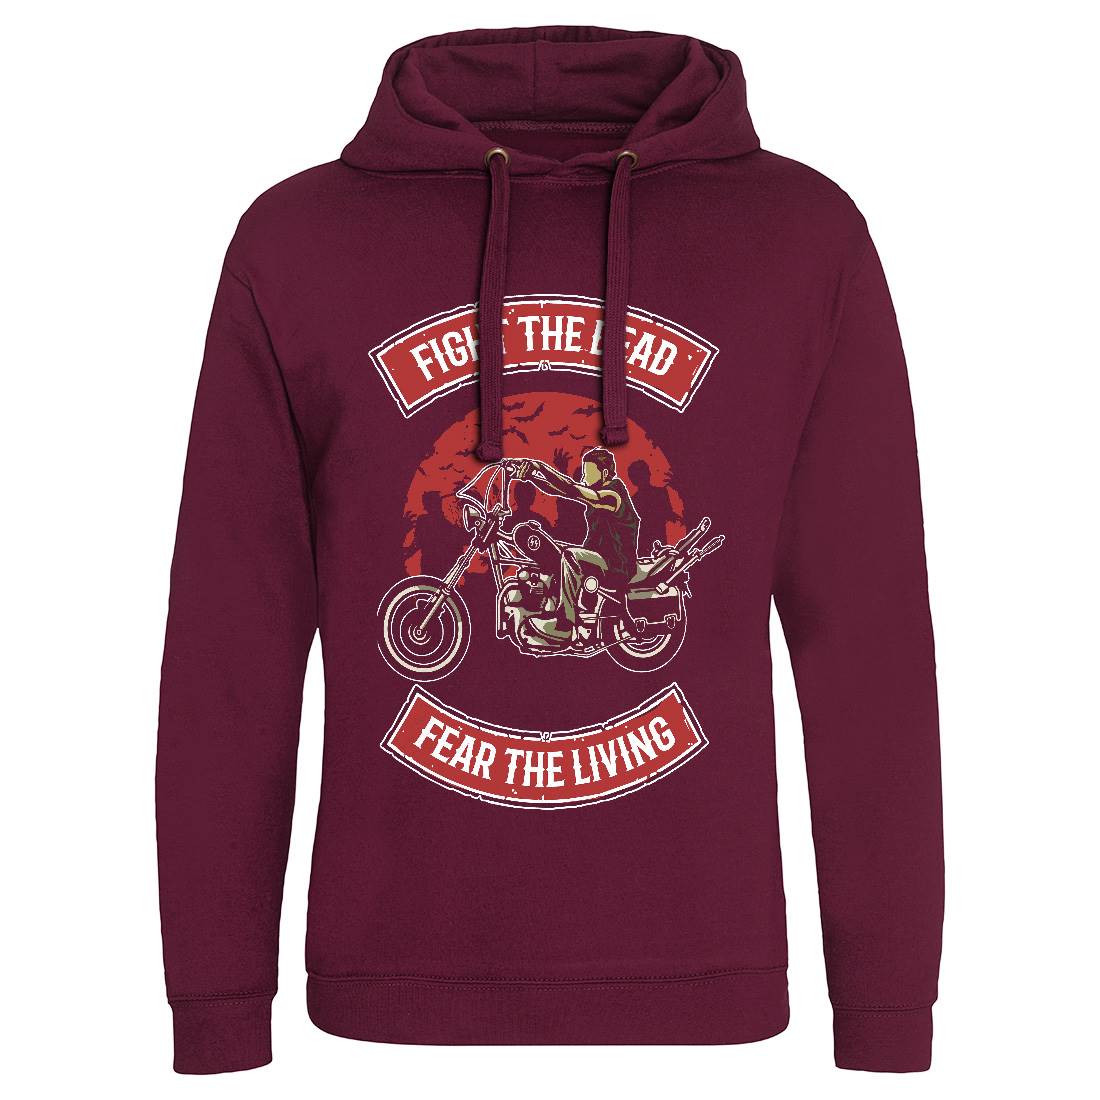 Fight The Dead Mens Hoodie Without Pocket Motorcycles A528